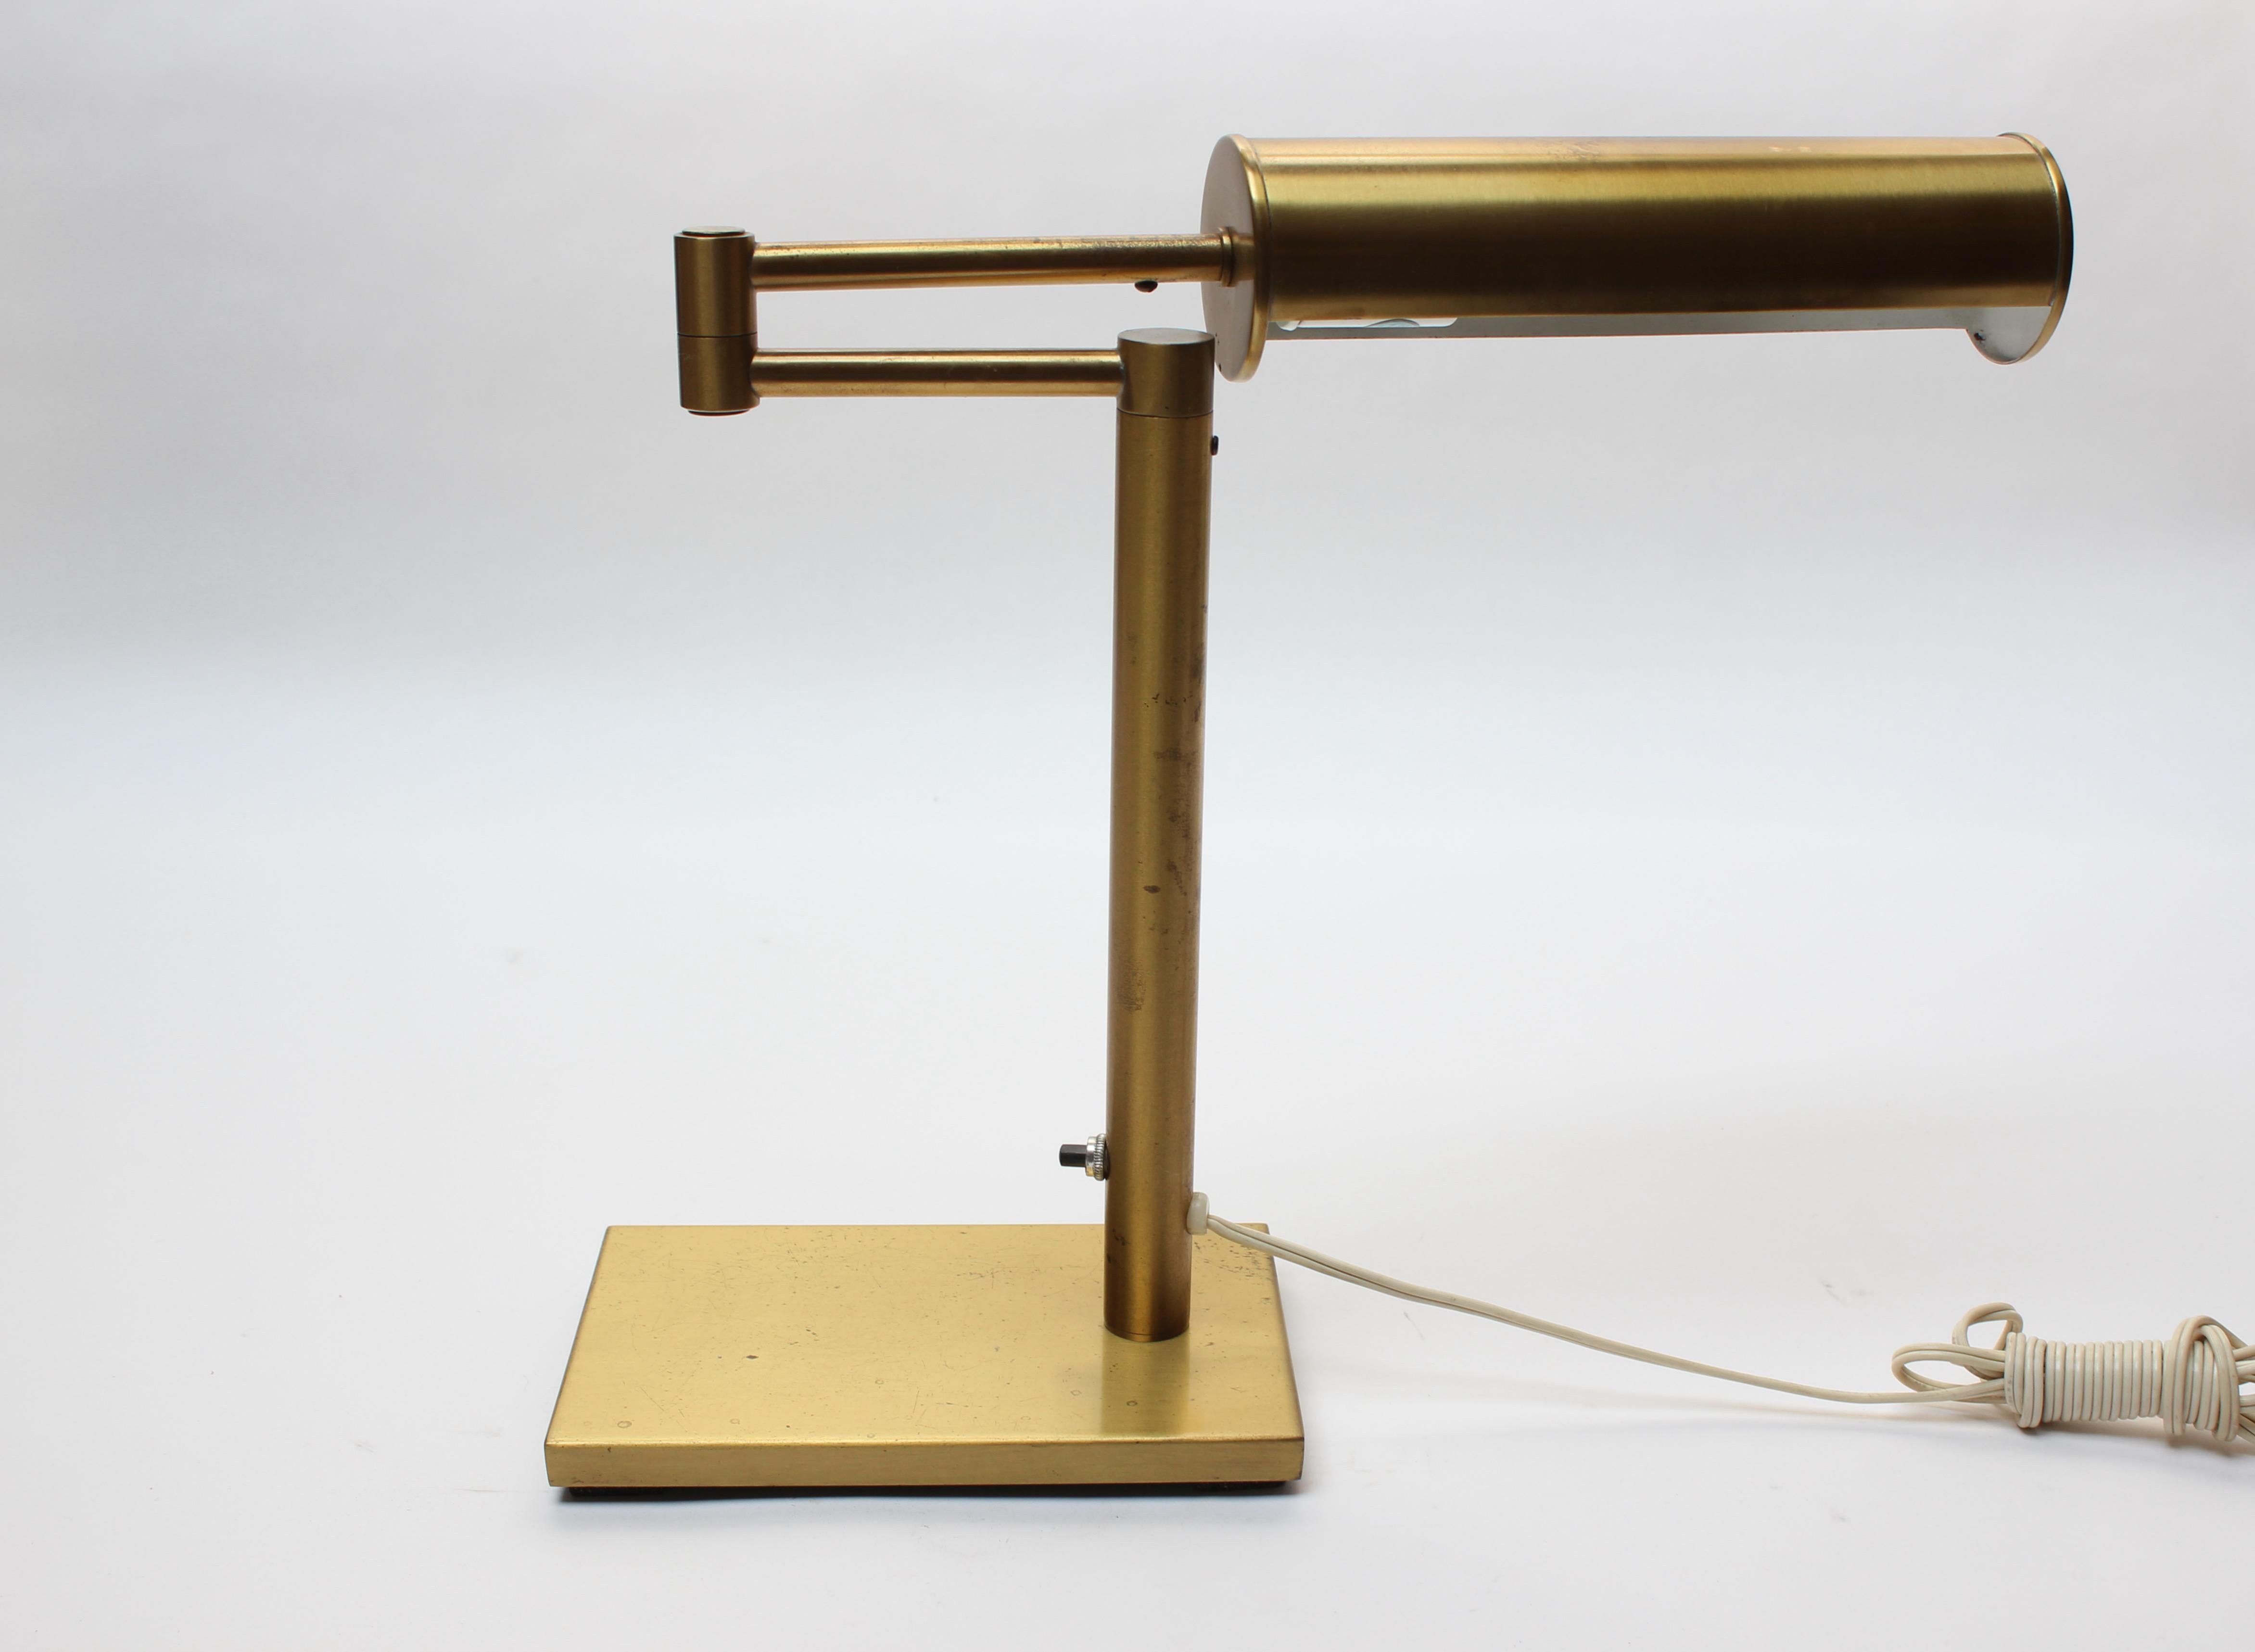 Attractive and highly functional desk / table lamp by Walter Von Nessen for his eponymous Nessen Studio (ca. 1970s, New York City). Features a swing arm and pivoting, perforated, cylindrical shade. 
Natural, warm patina present along with light,